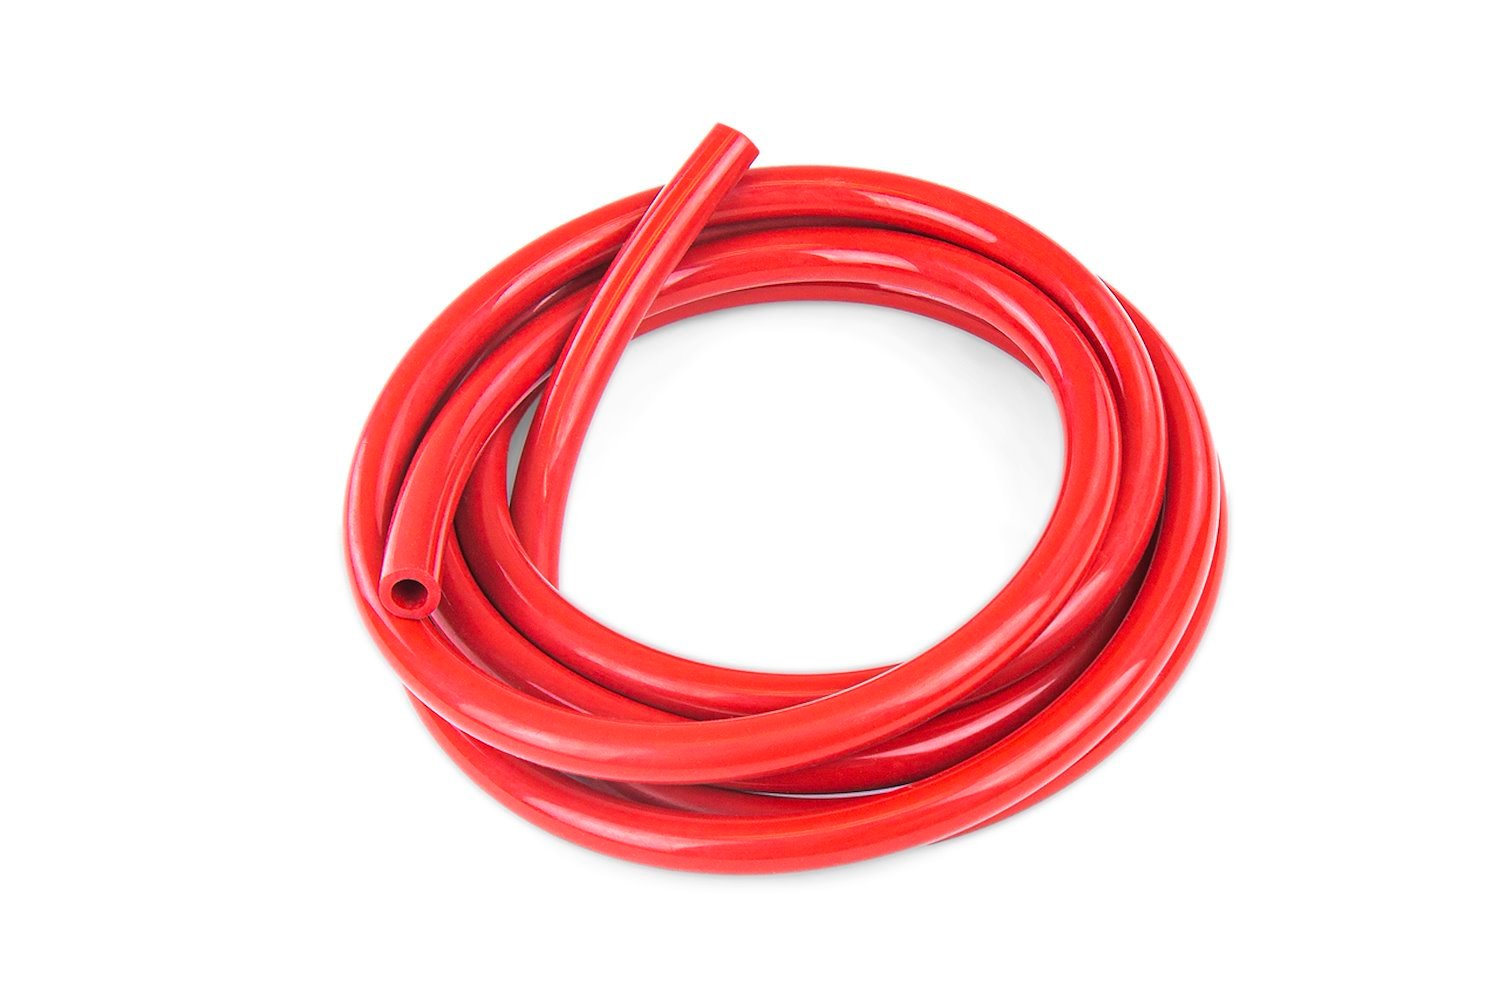 HTSVH10-RED High-Temperature Silicone Vacuum Hose Tubing, 10 mm ID, Red